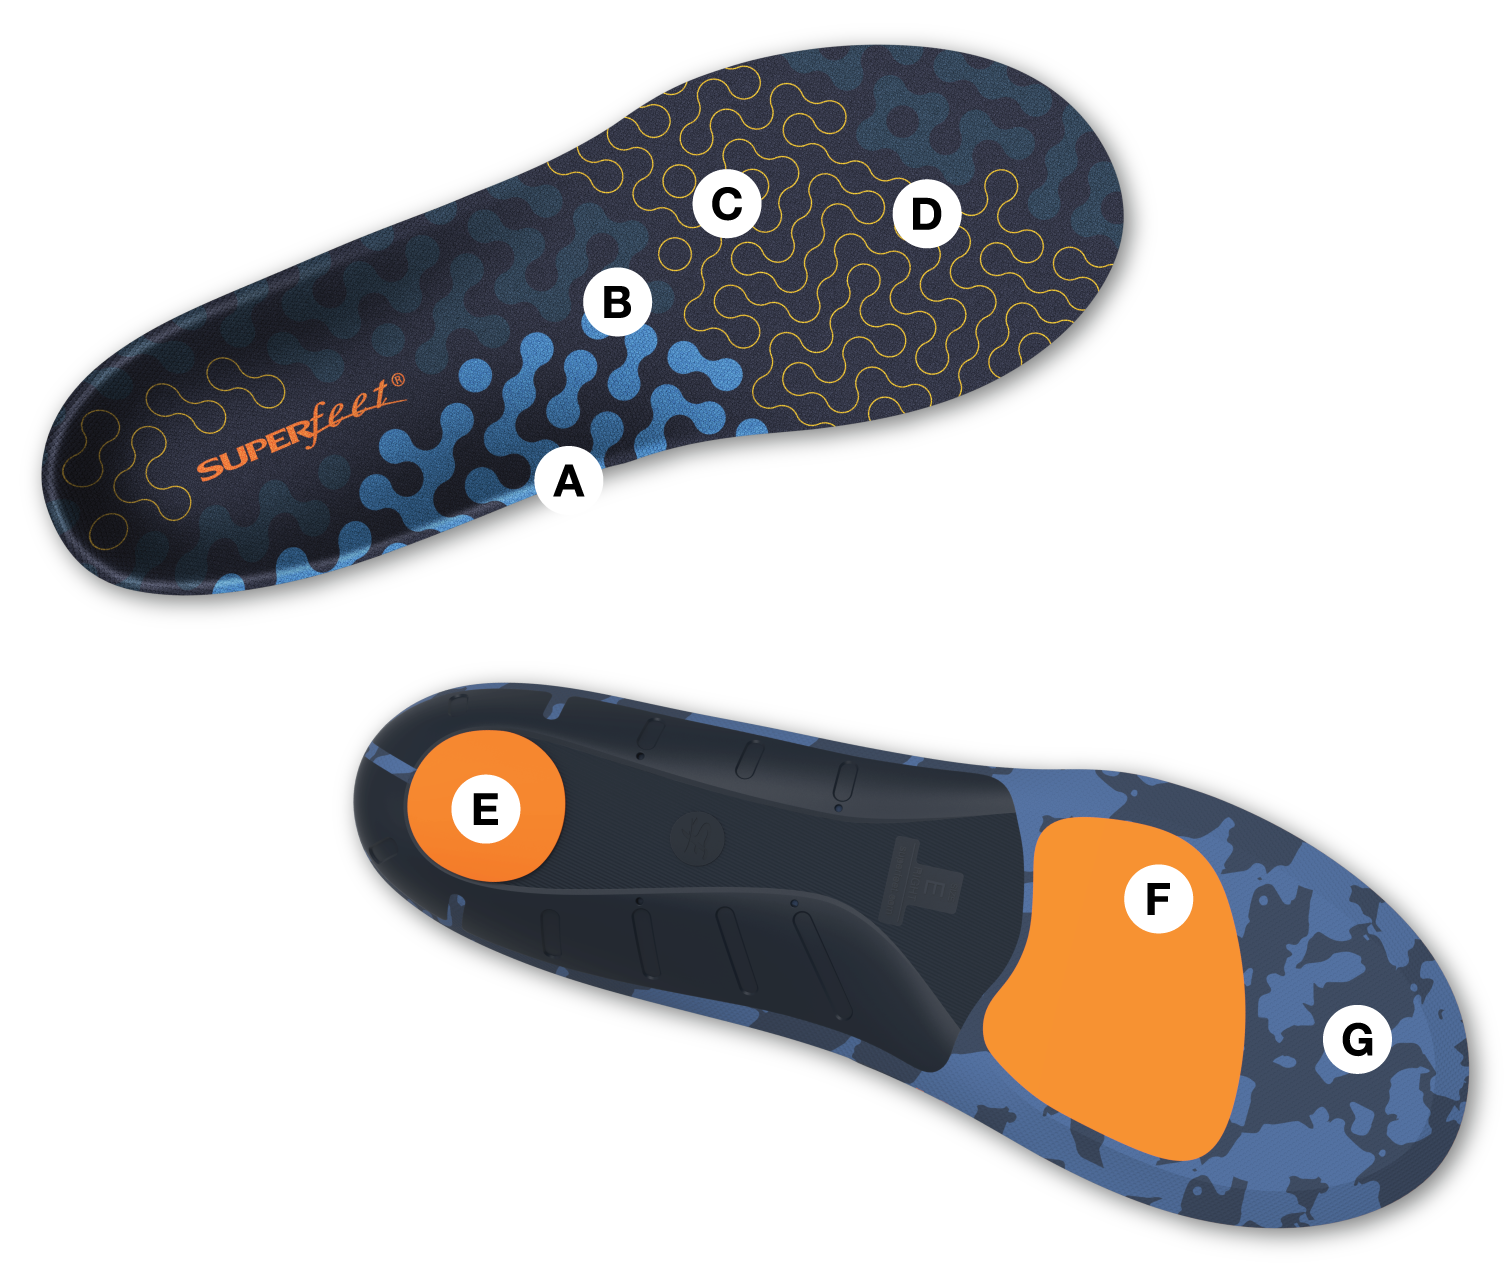 Top down view of top and bottom of Active Cushion Low Arch insole with A through G letter highlights